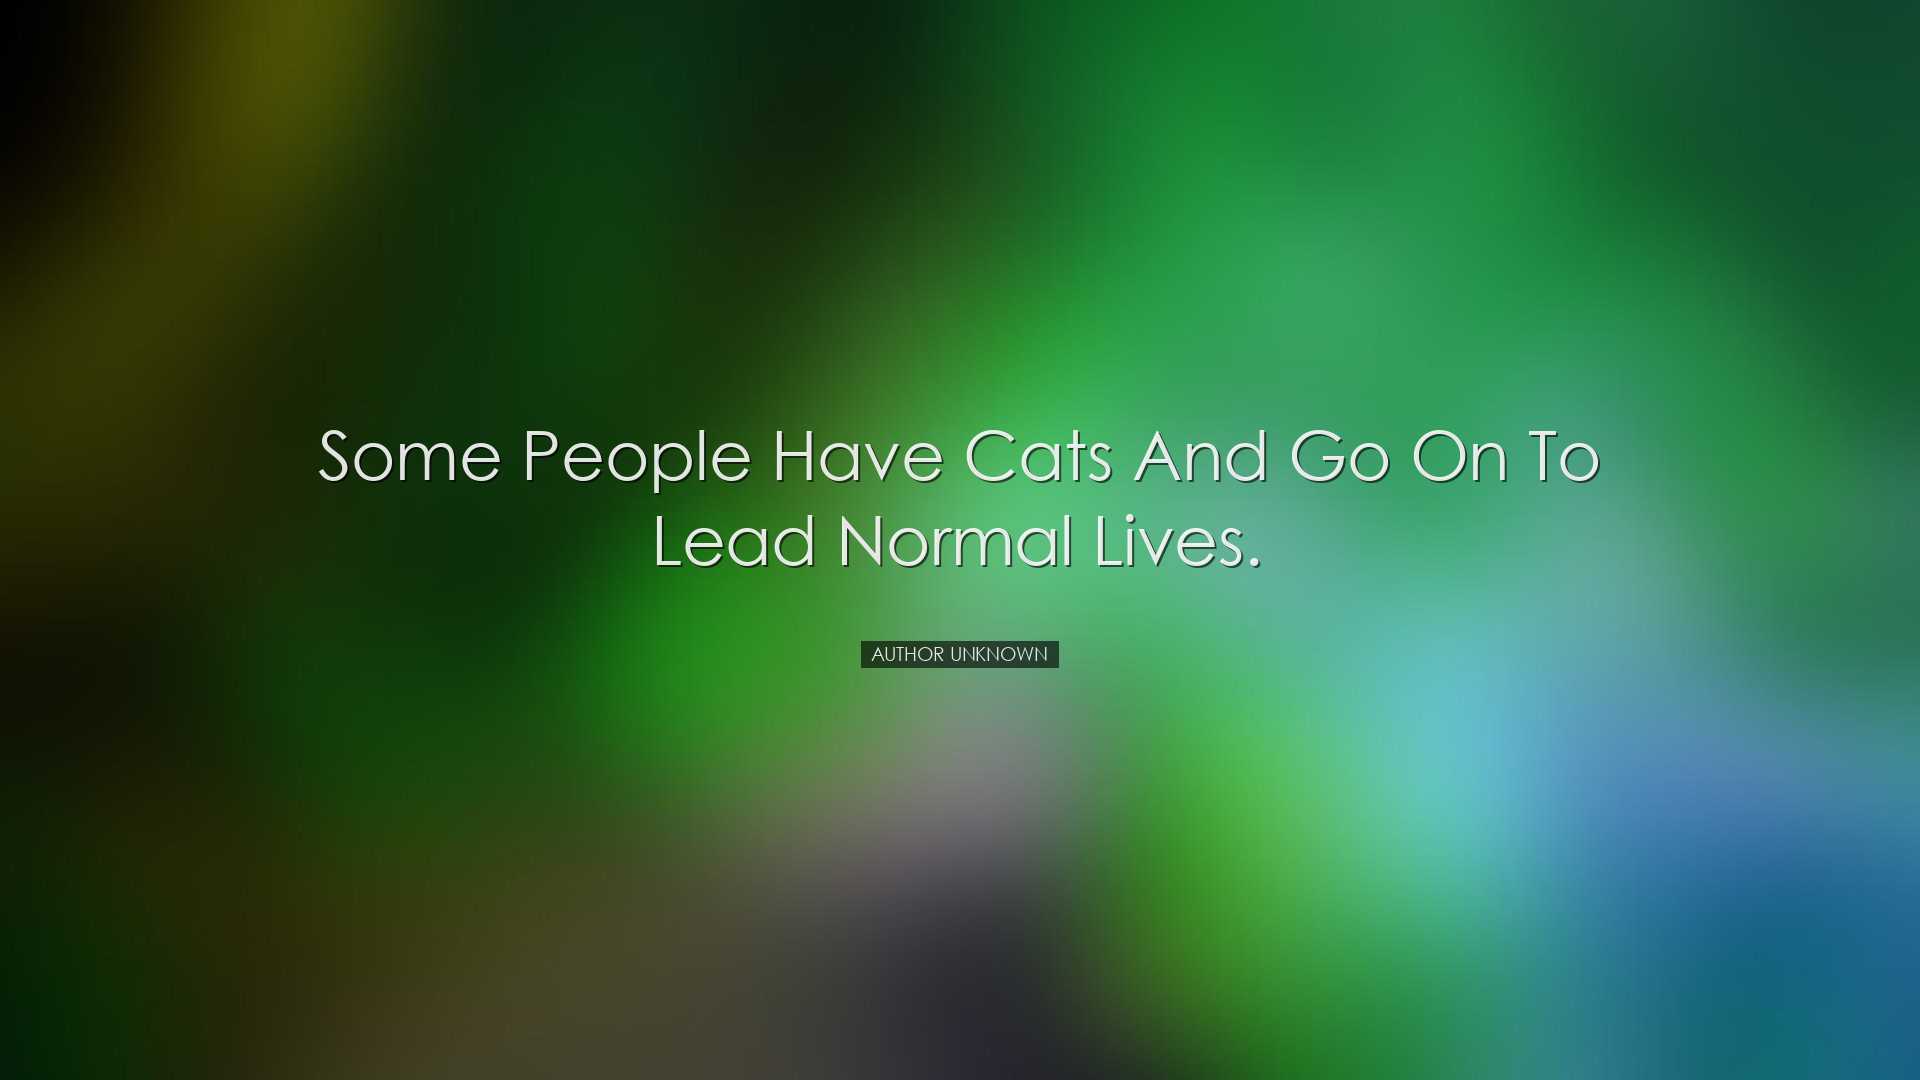 Some people have cats and go on to lead normal lives. - Author Unk